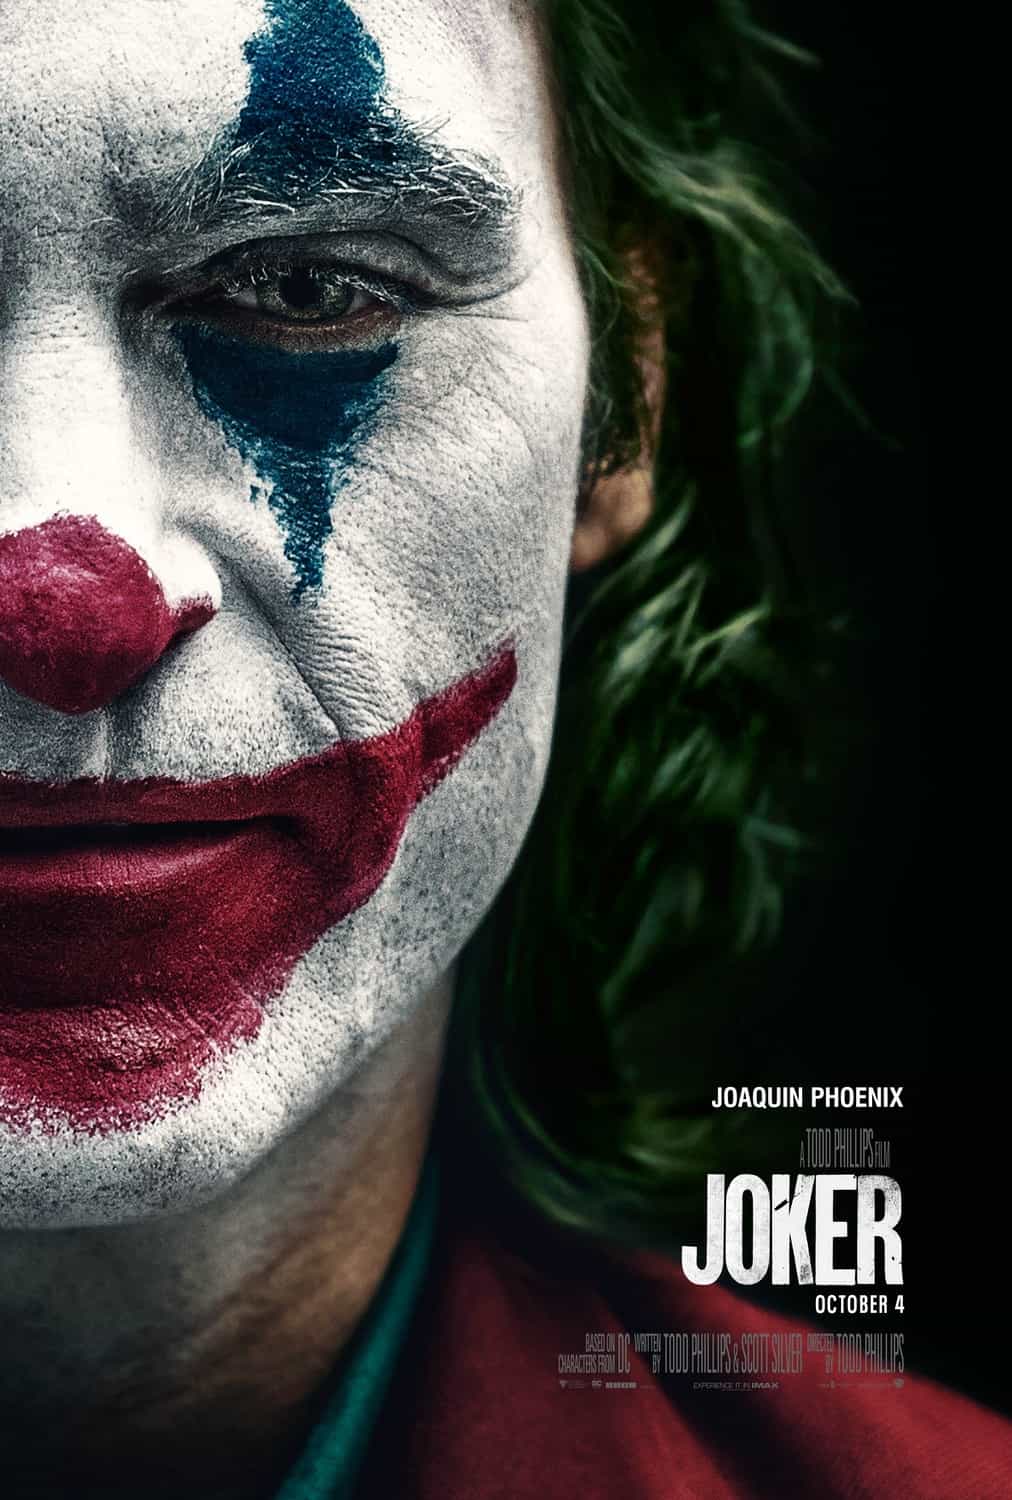 US Box Office Analysis 11 - 13 October 2019:  Joker keeps a convincing lead on the box office with The Addams Family having the highest new entry